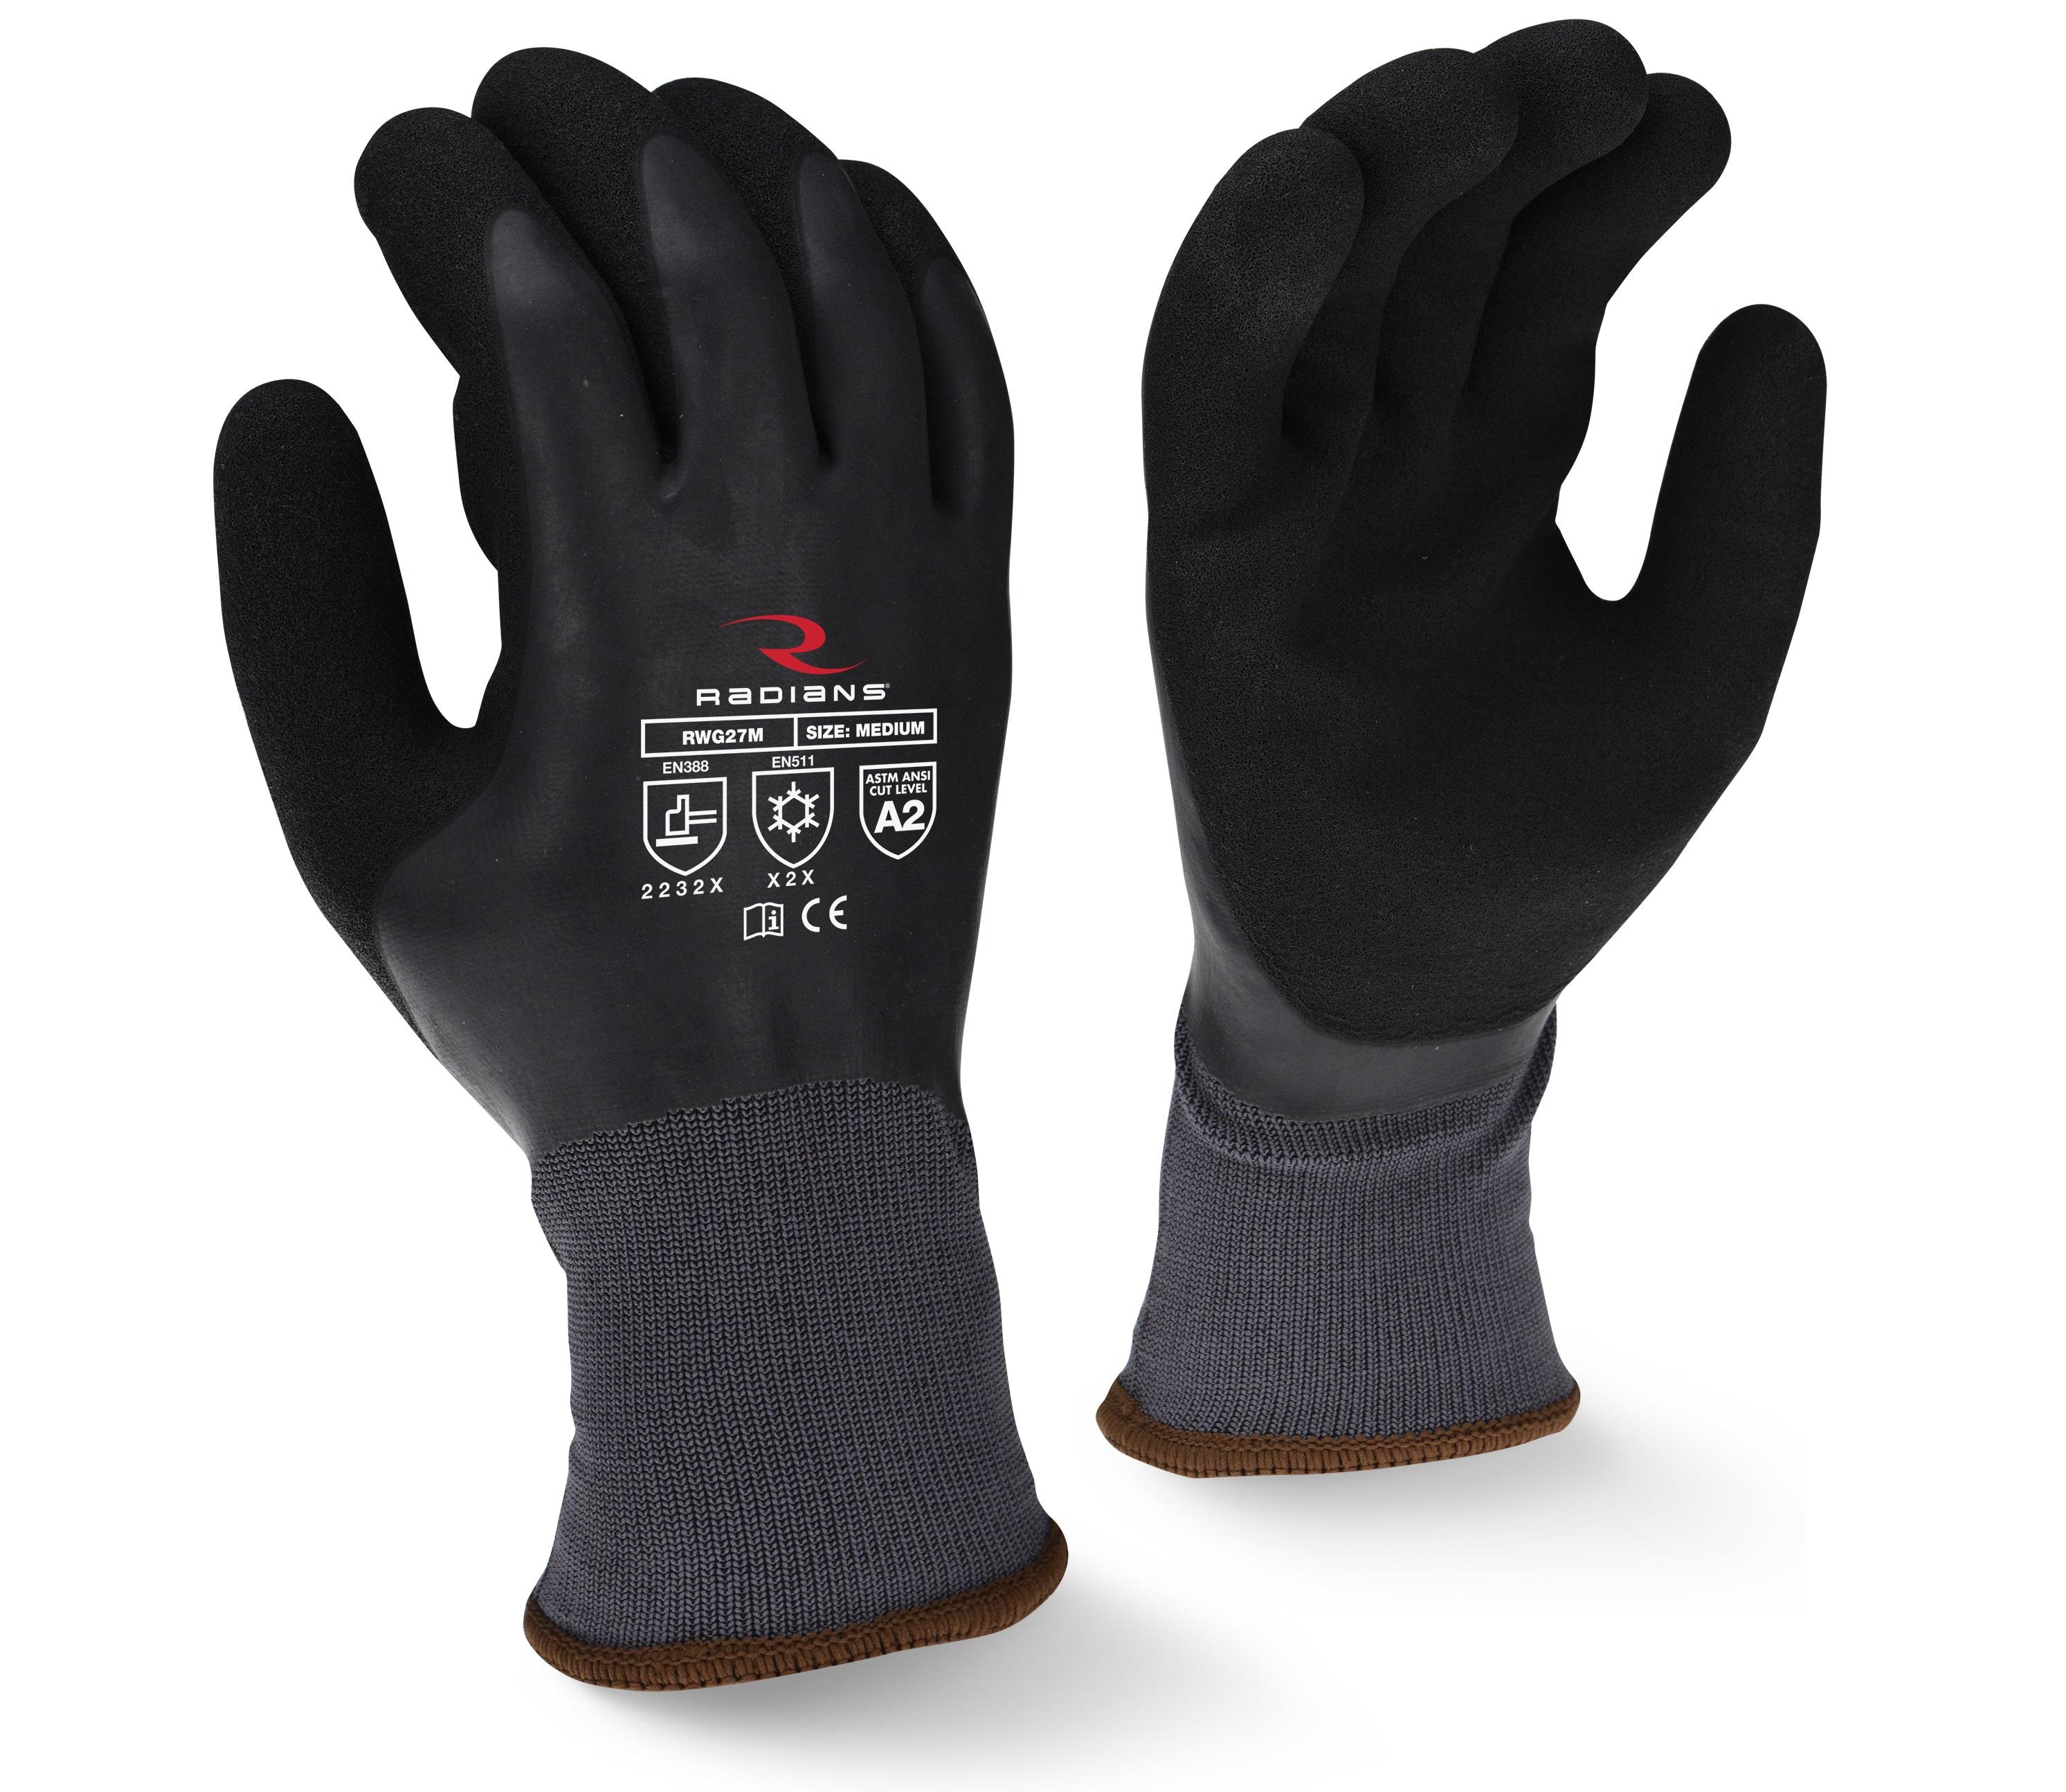 RADIANS RWG28 FULL LATEX WINTER GLOVE - Insulated Gloves